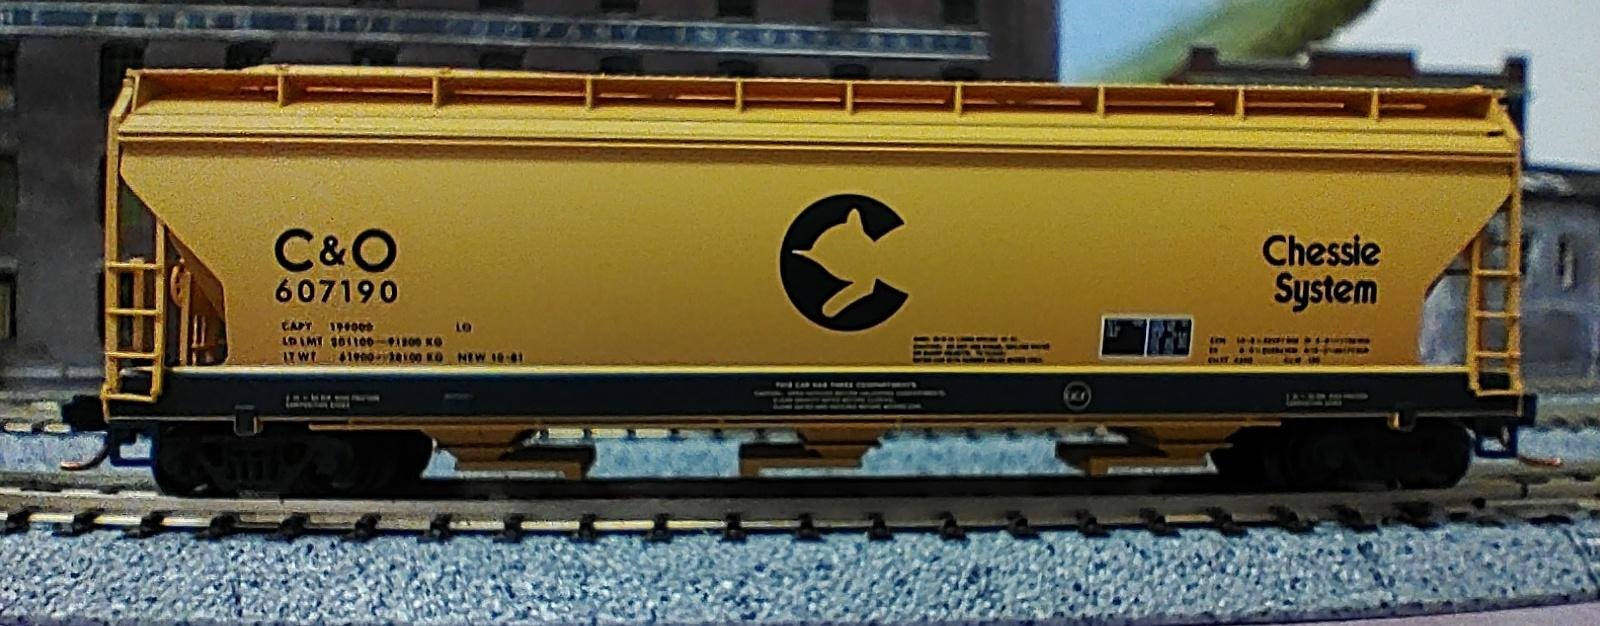 Micro-trains MTL N Union Pacific 3-bay COVD Hopper 09400601 for sale online 